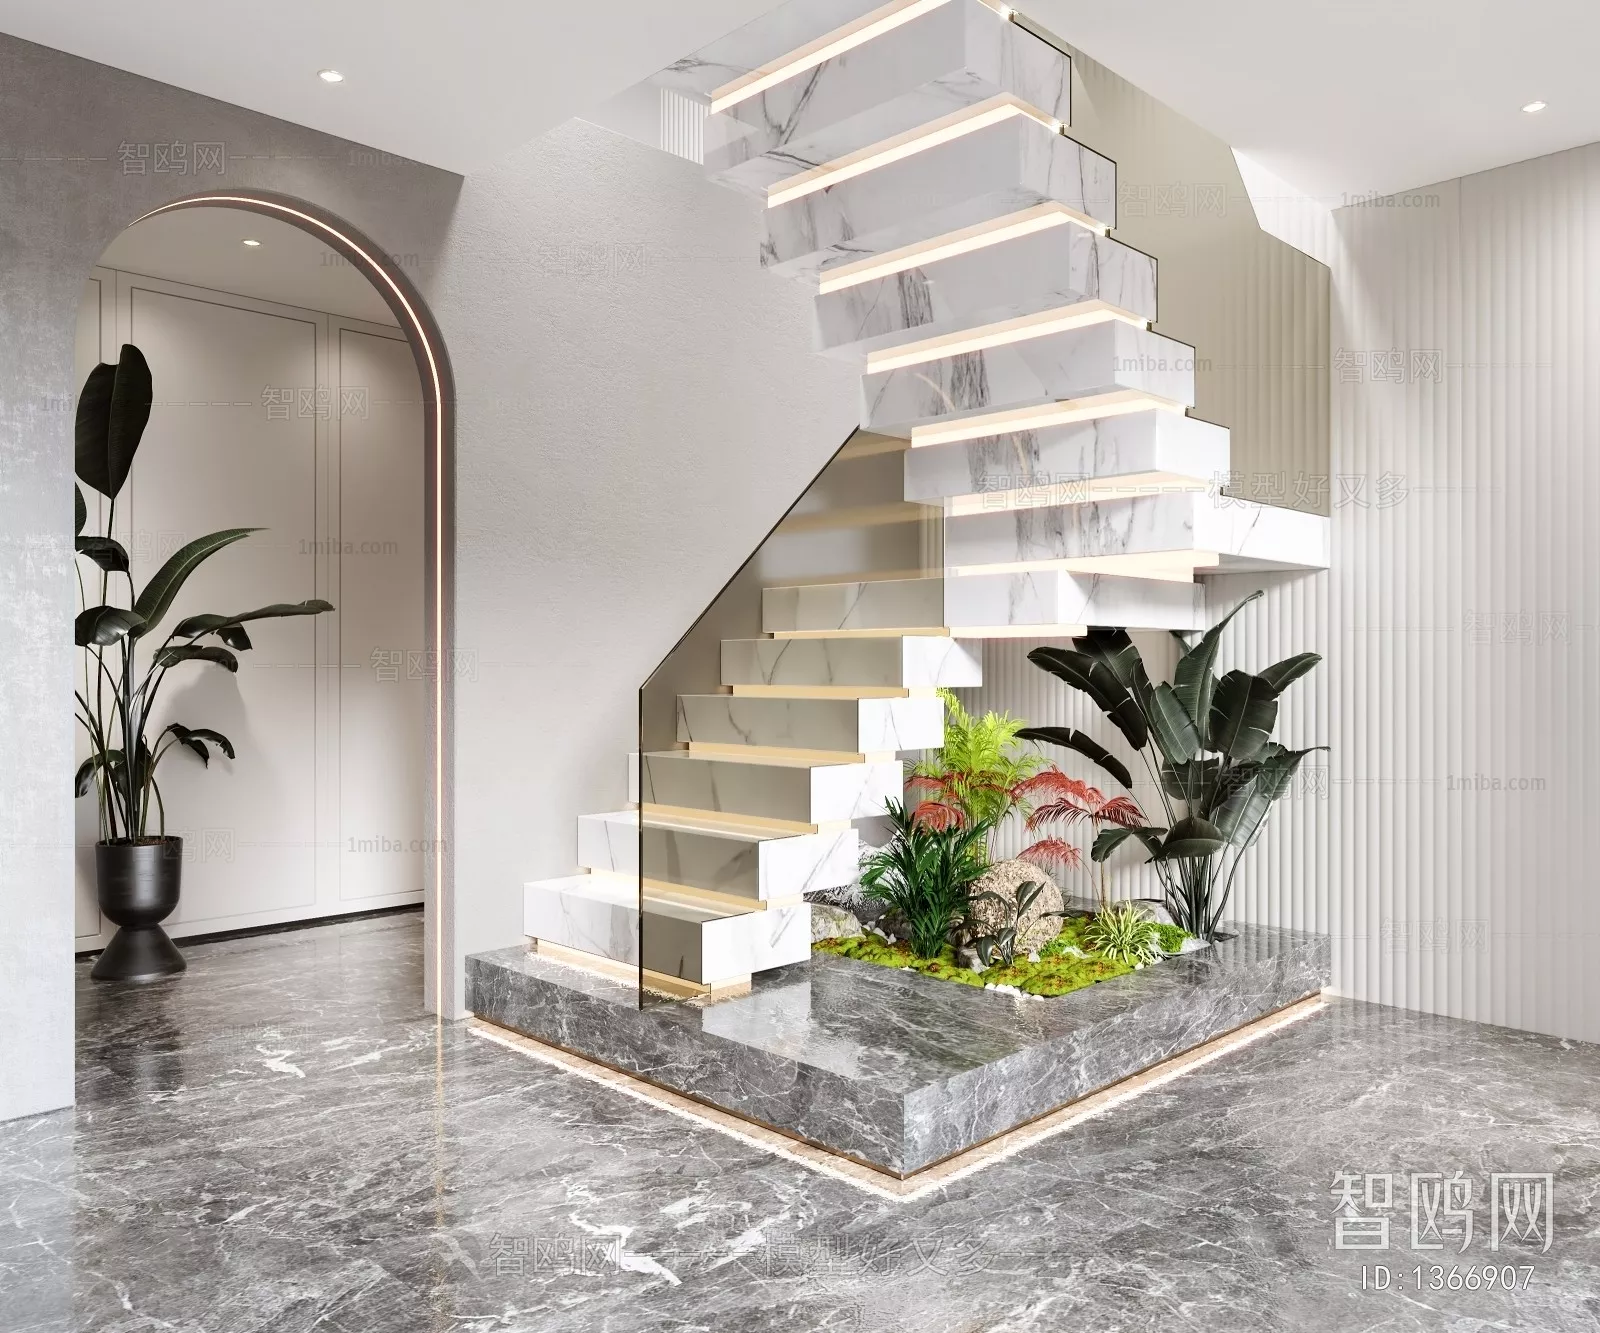 MODERN STAIR - SKETCHUP 3D MODEL - VRAY OR ENSCAPE - ID14206